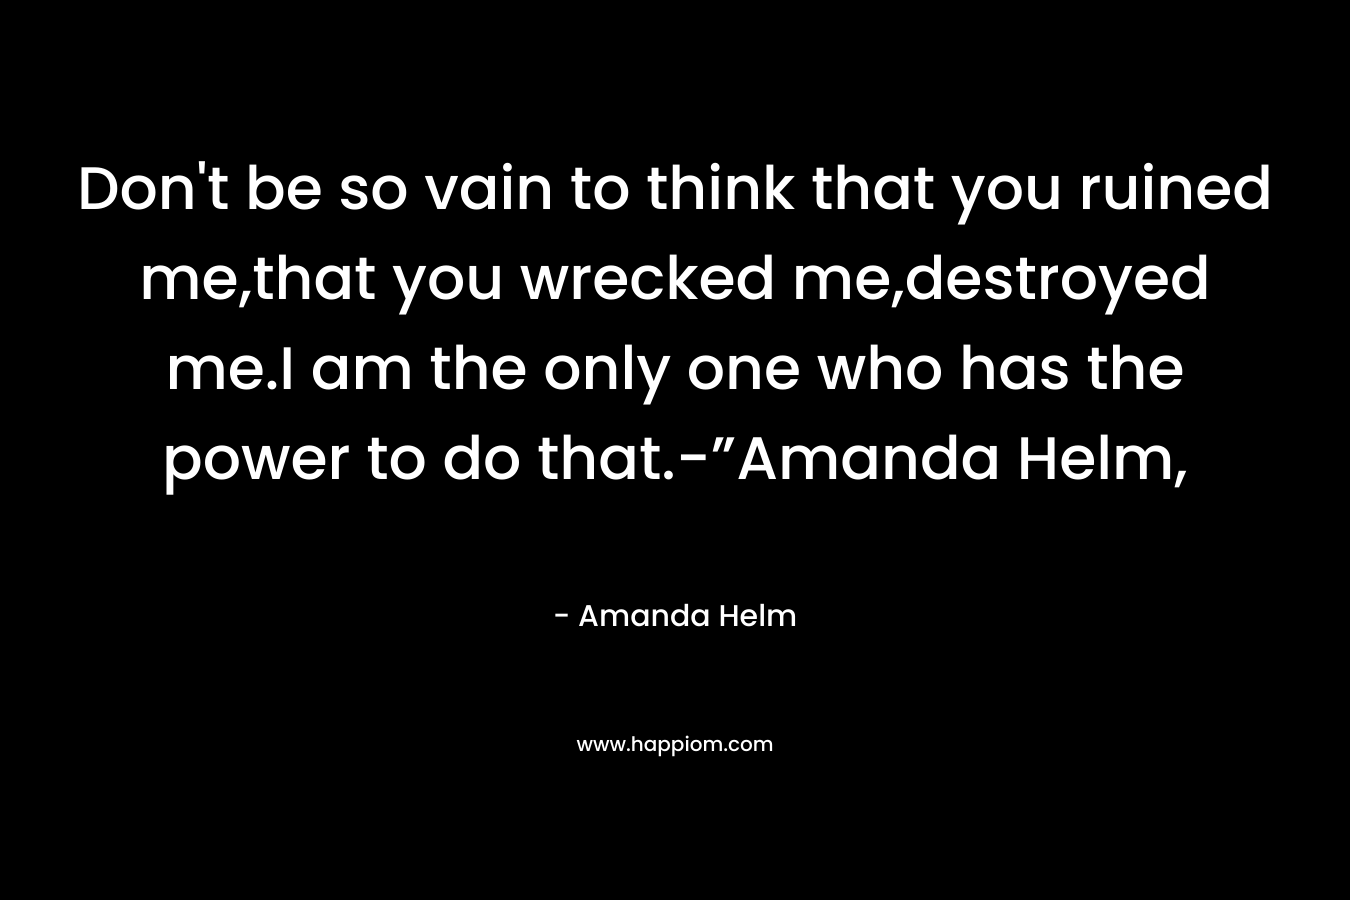 Don't be so vain to think that you ruined me,that you wrecked me,destroyed me.I am the only one who has the power to do that.-”Amanda Helm,